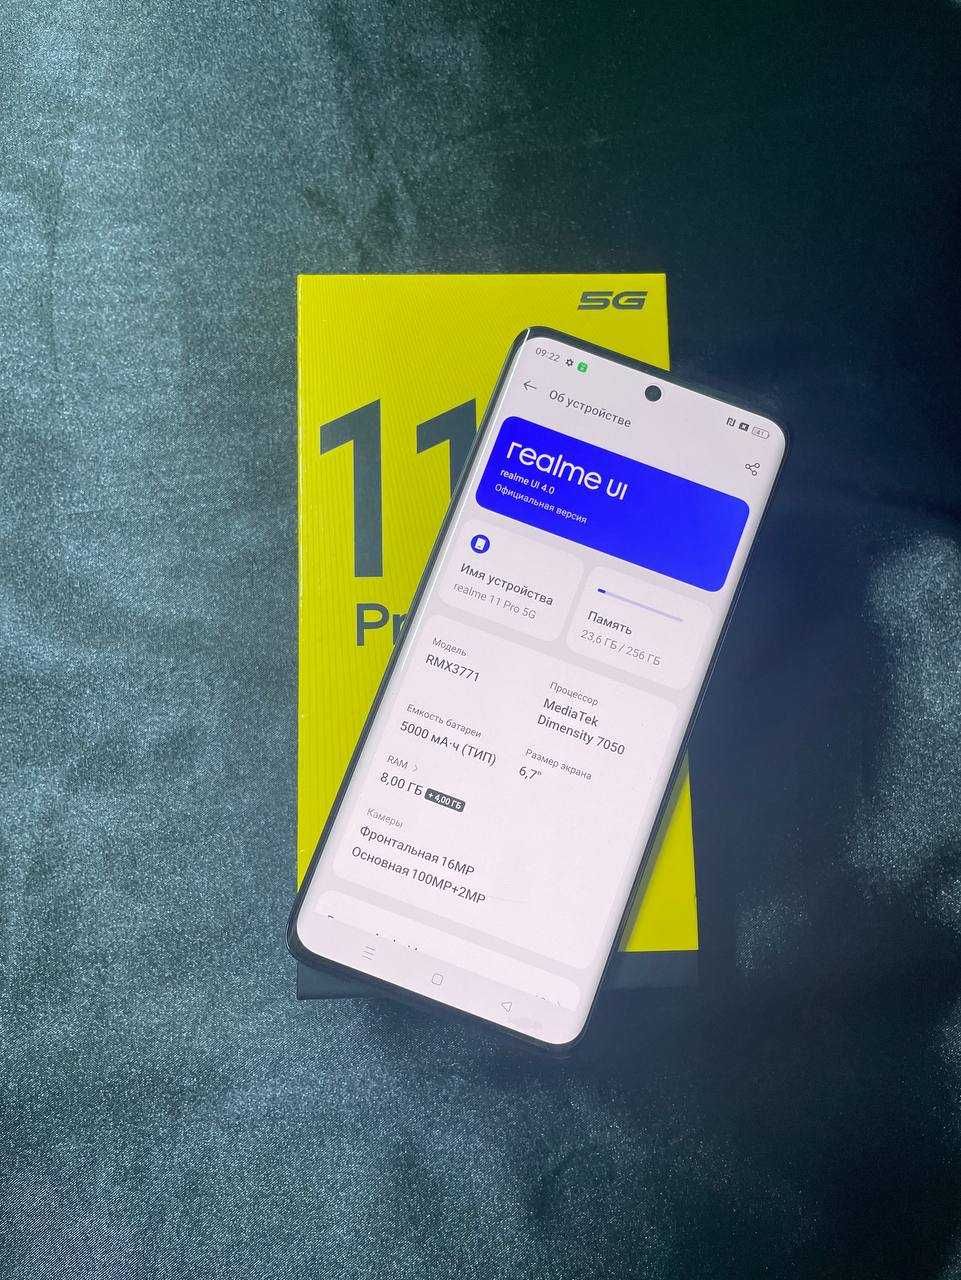 Oppo Realme 11 Pro ( Караганда, г. Абай) лот 339431